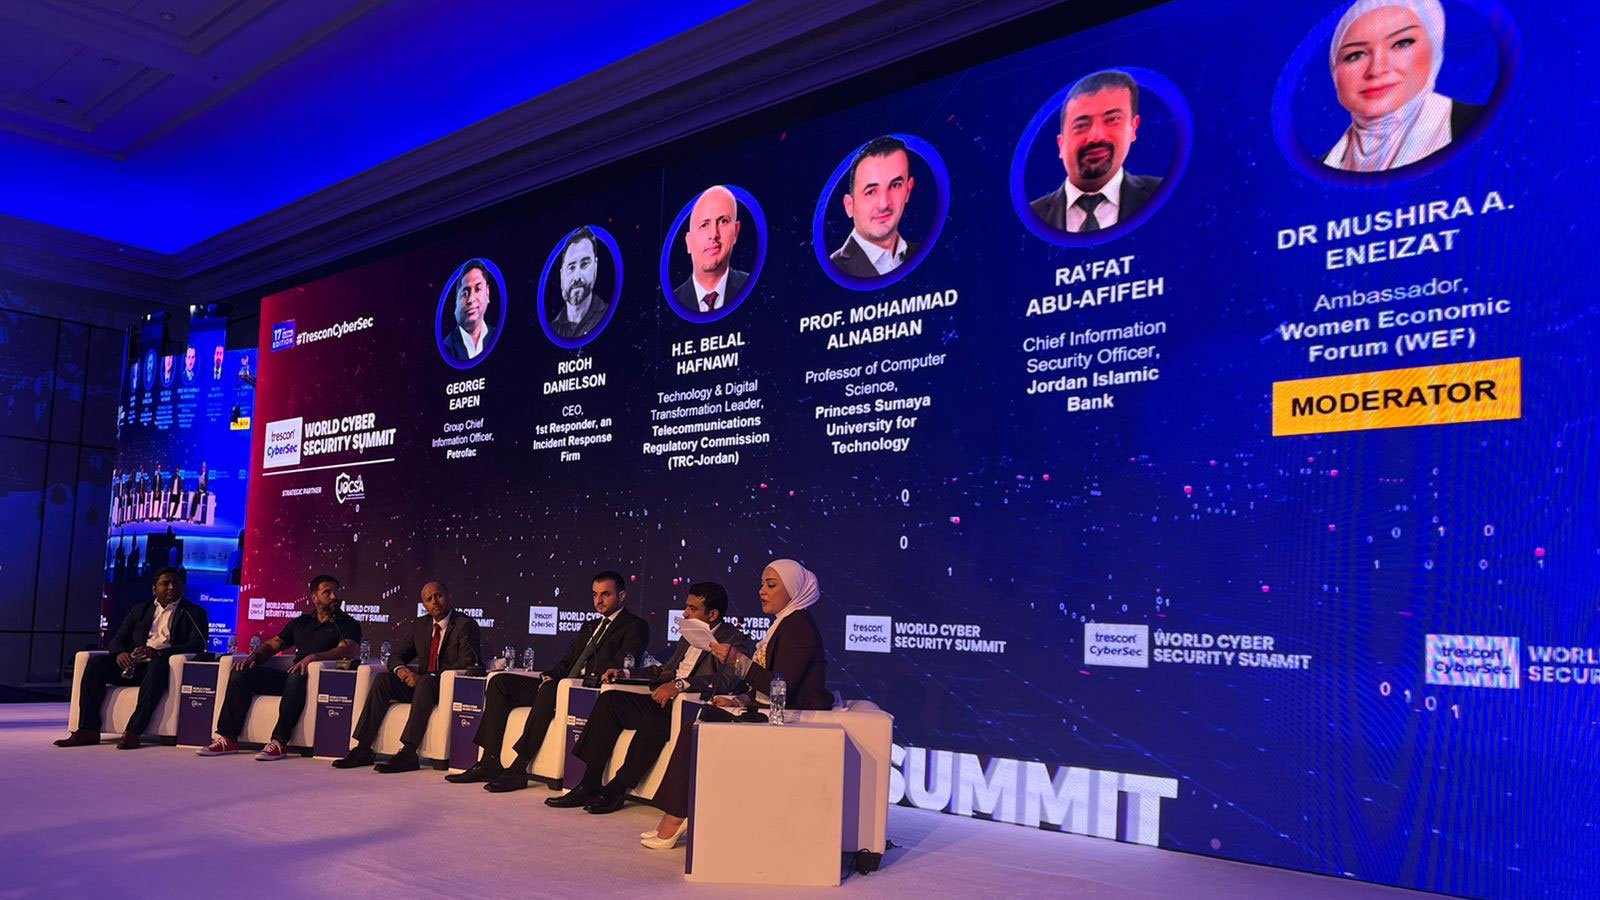 World Cyber Security Summit in Jordan Brought Together Global Cyber Security Experts to Tackle the Battle Against Cyber Threats